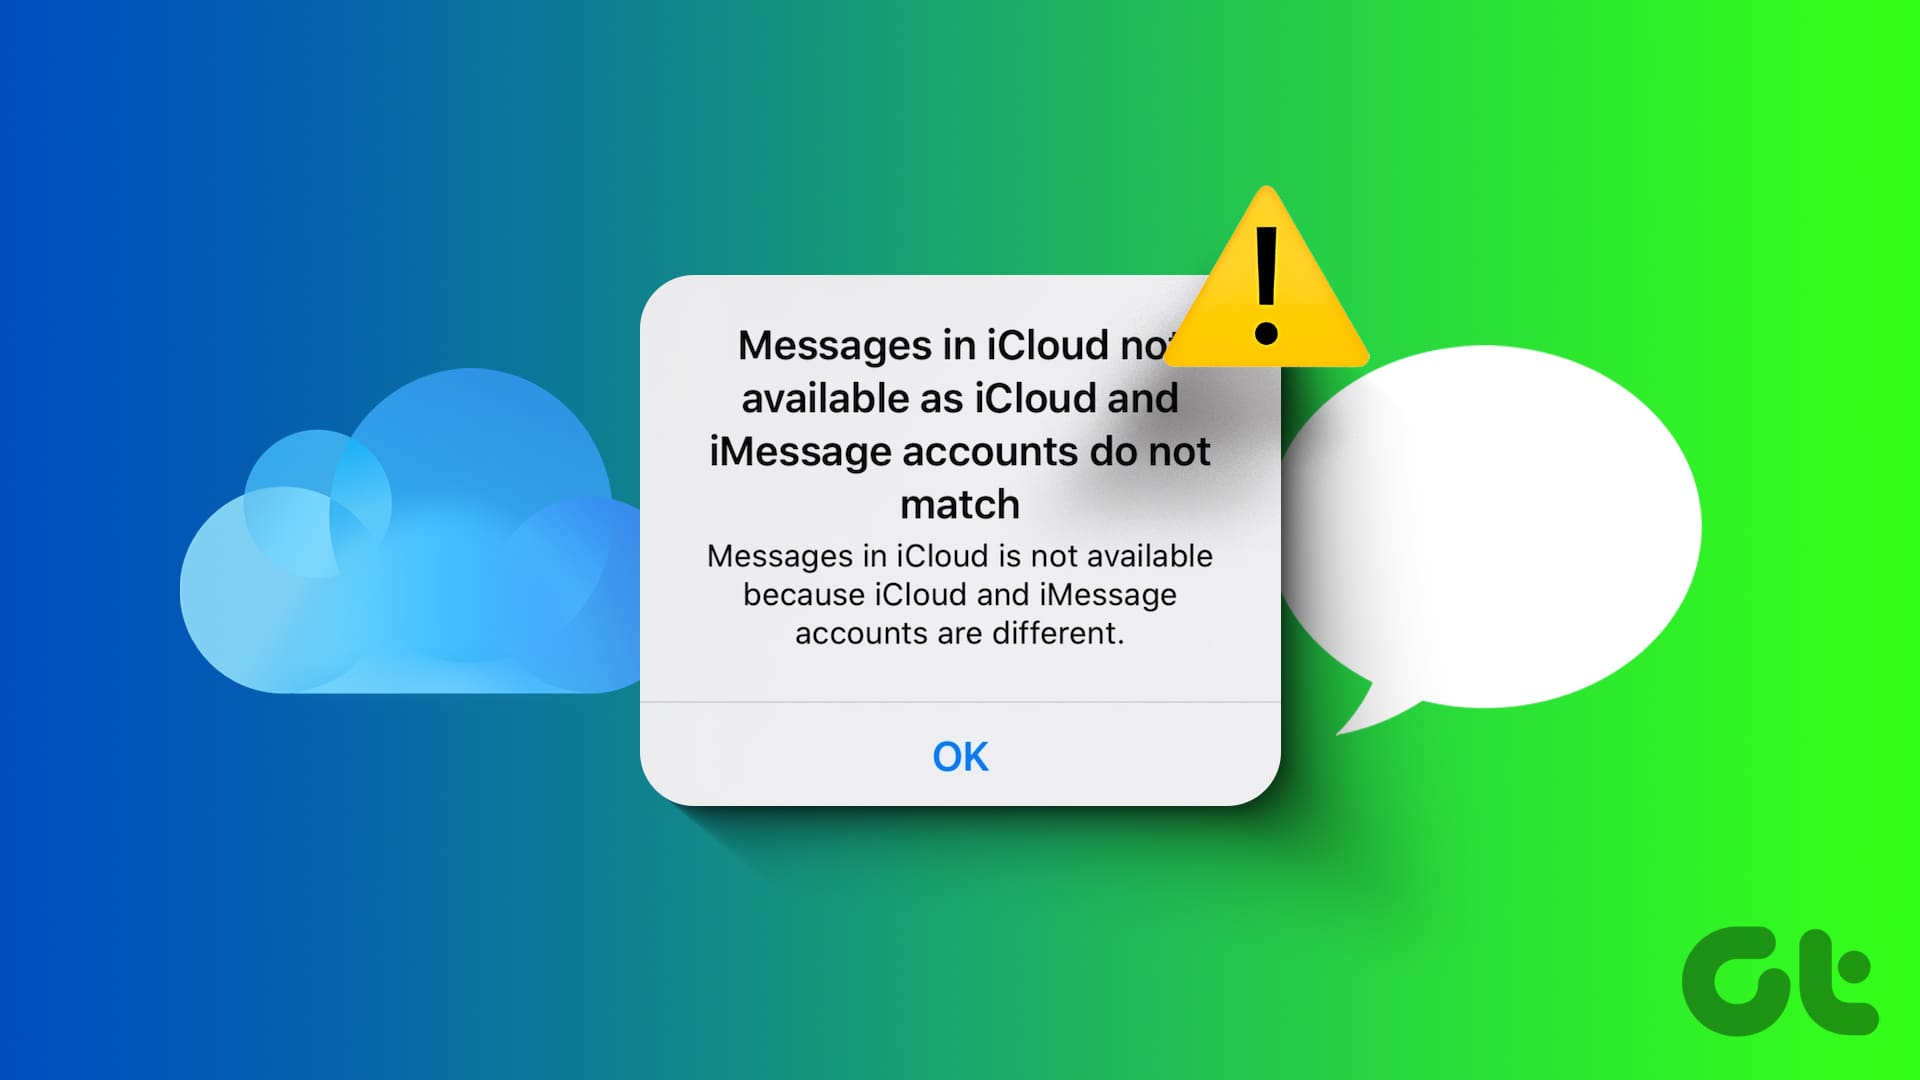 iCloud and iMessage accounts do not match